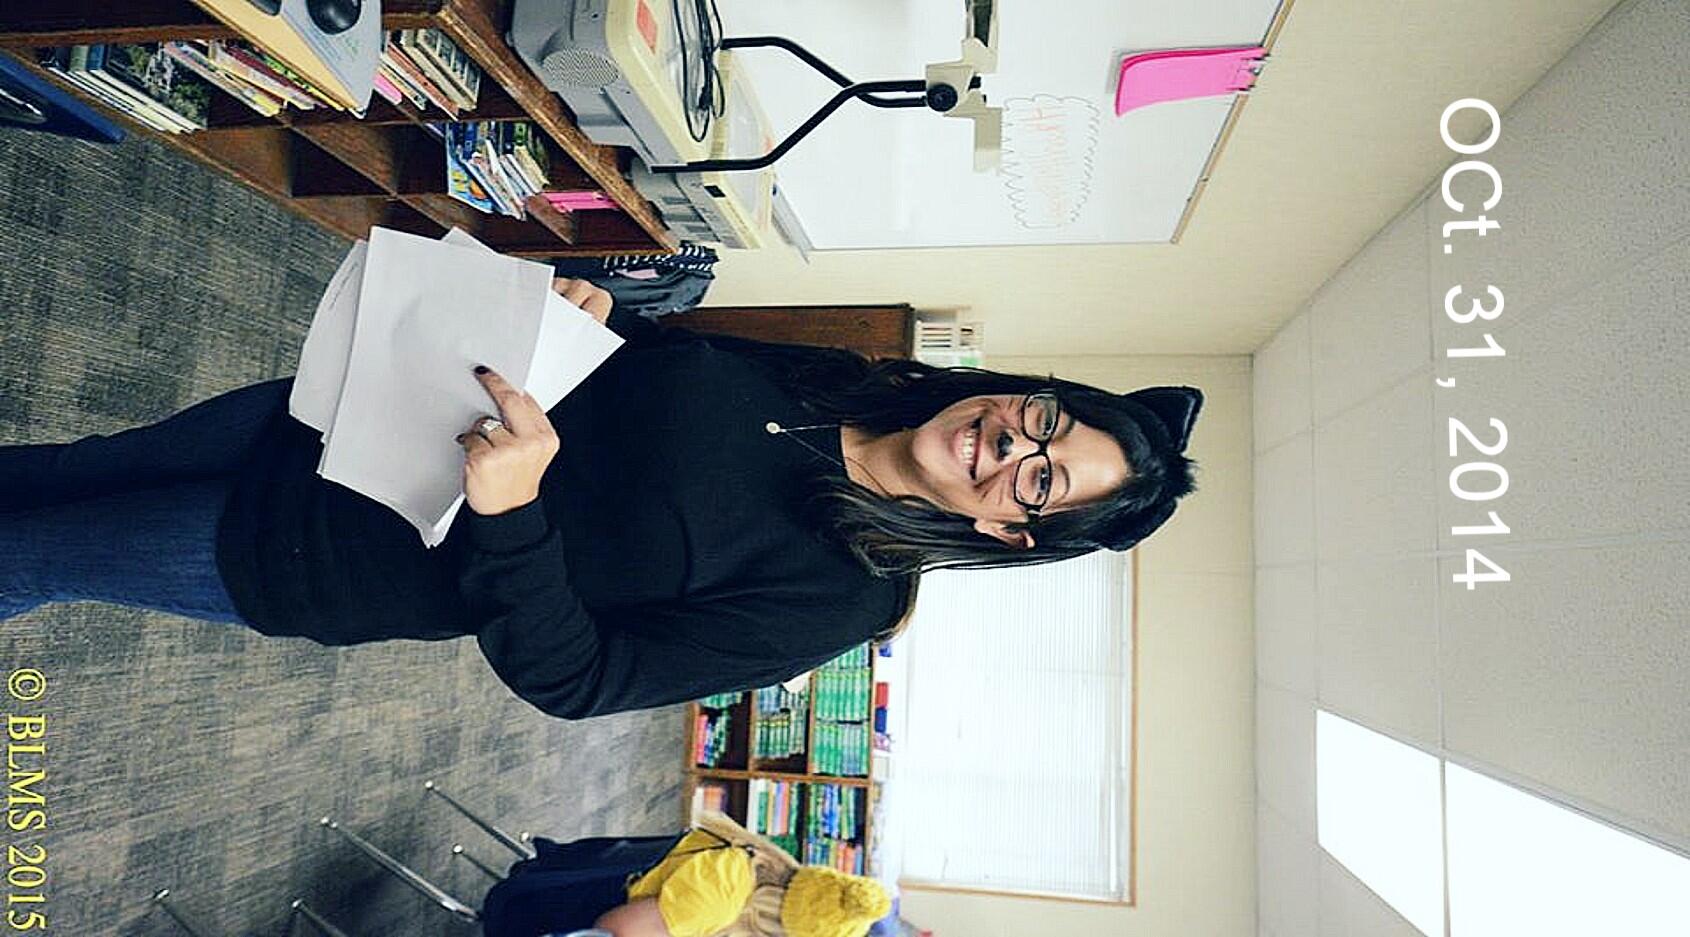 Mrs. Accardo dressed as a cat. 